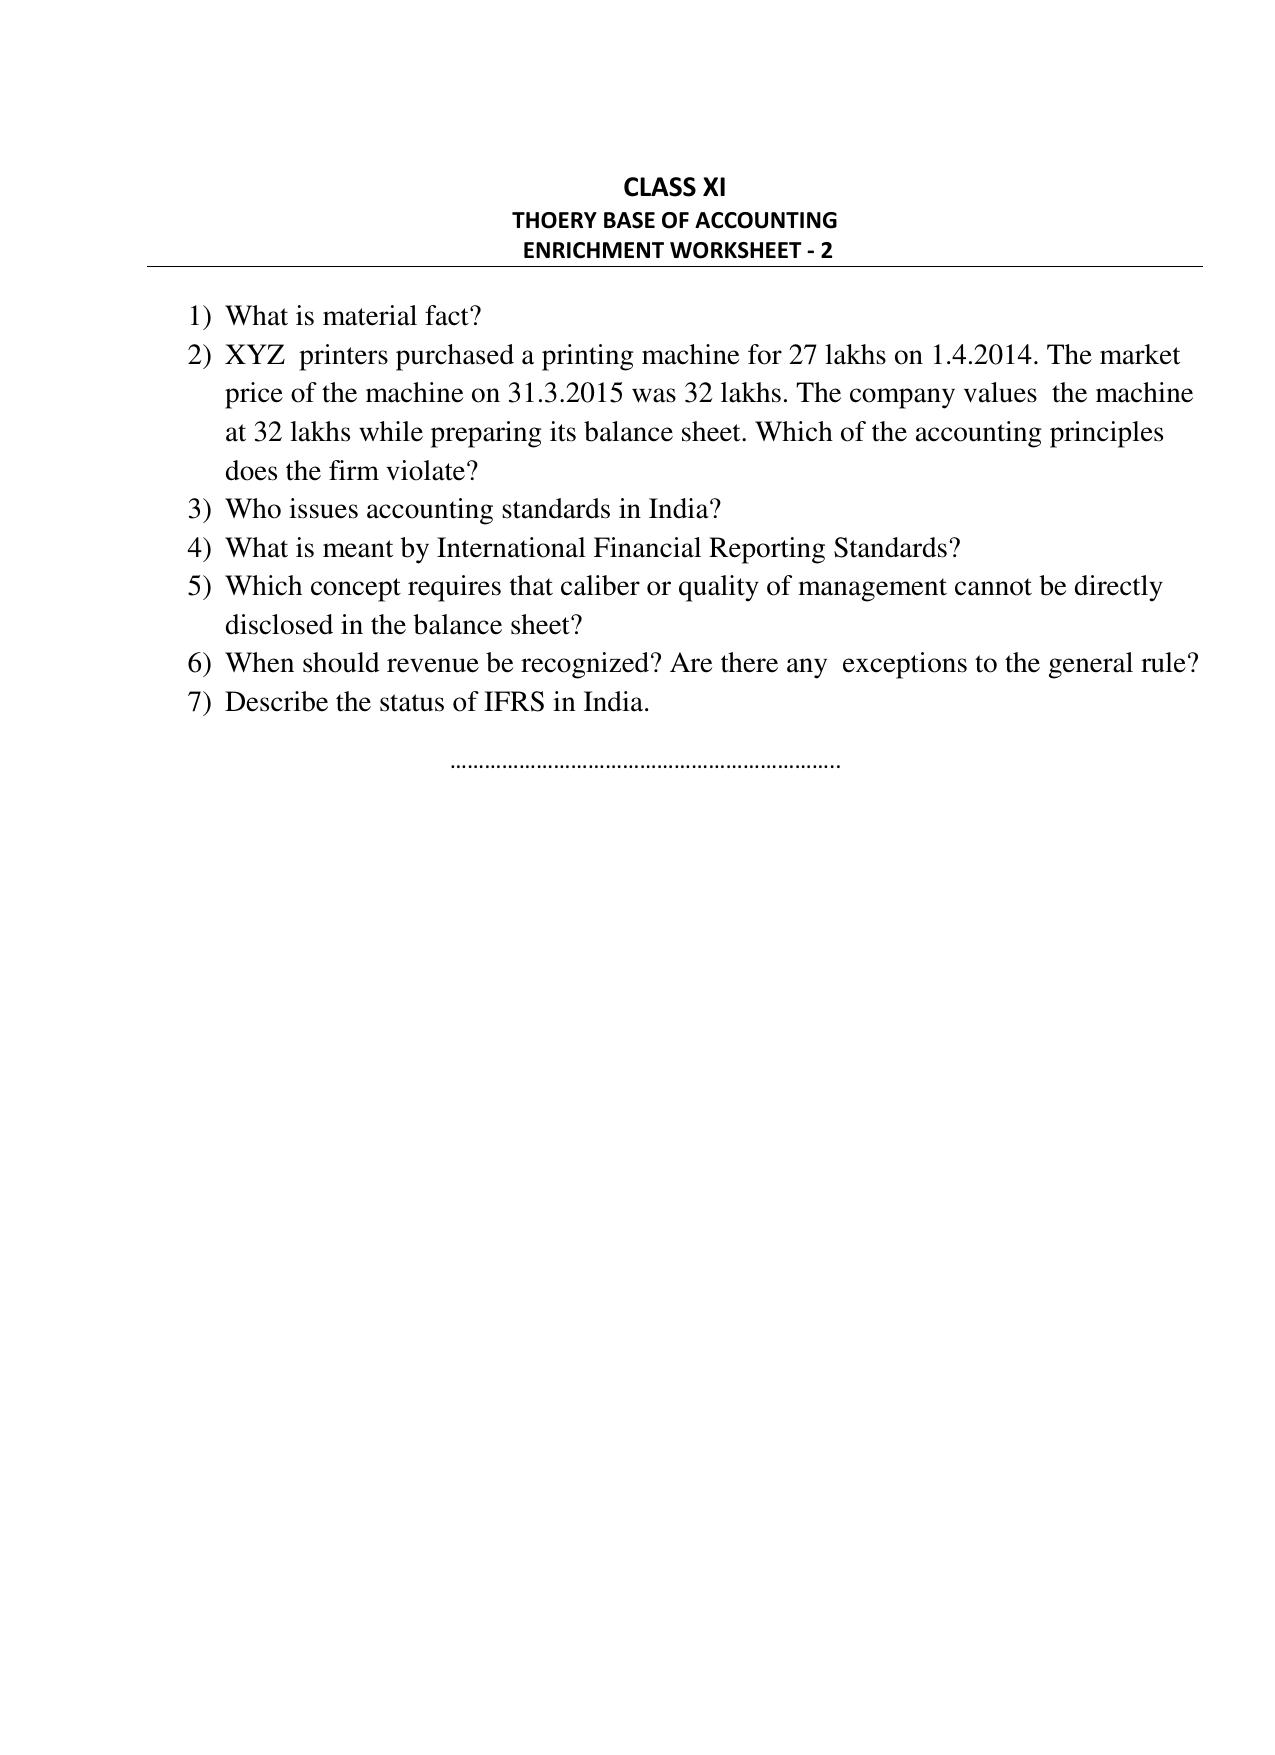 CBSE Worksheets for Class 11 Accountancy Theory Base of Accounting Enrichment Assignment - Page 1